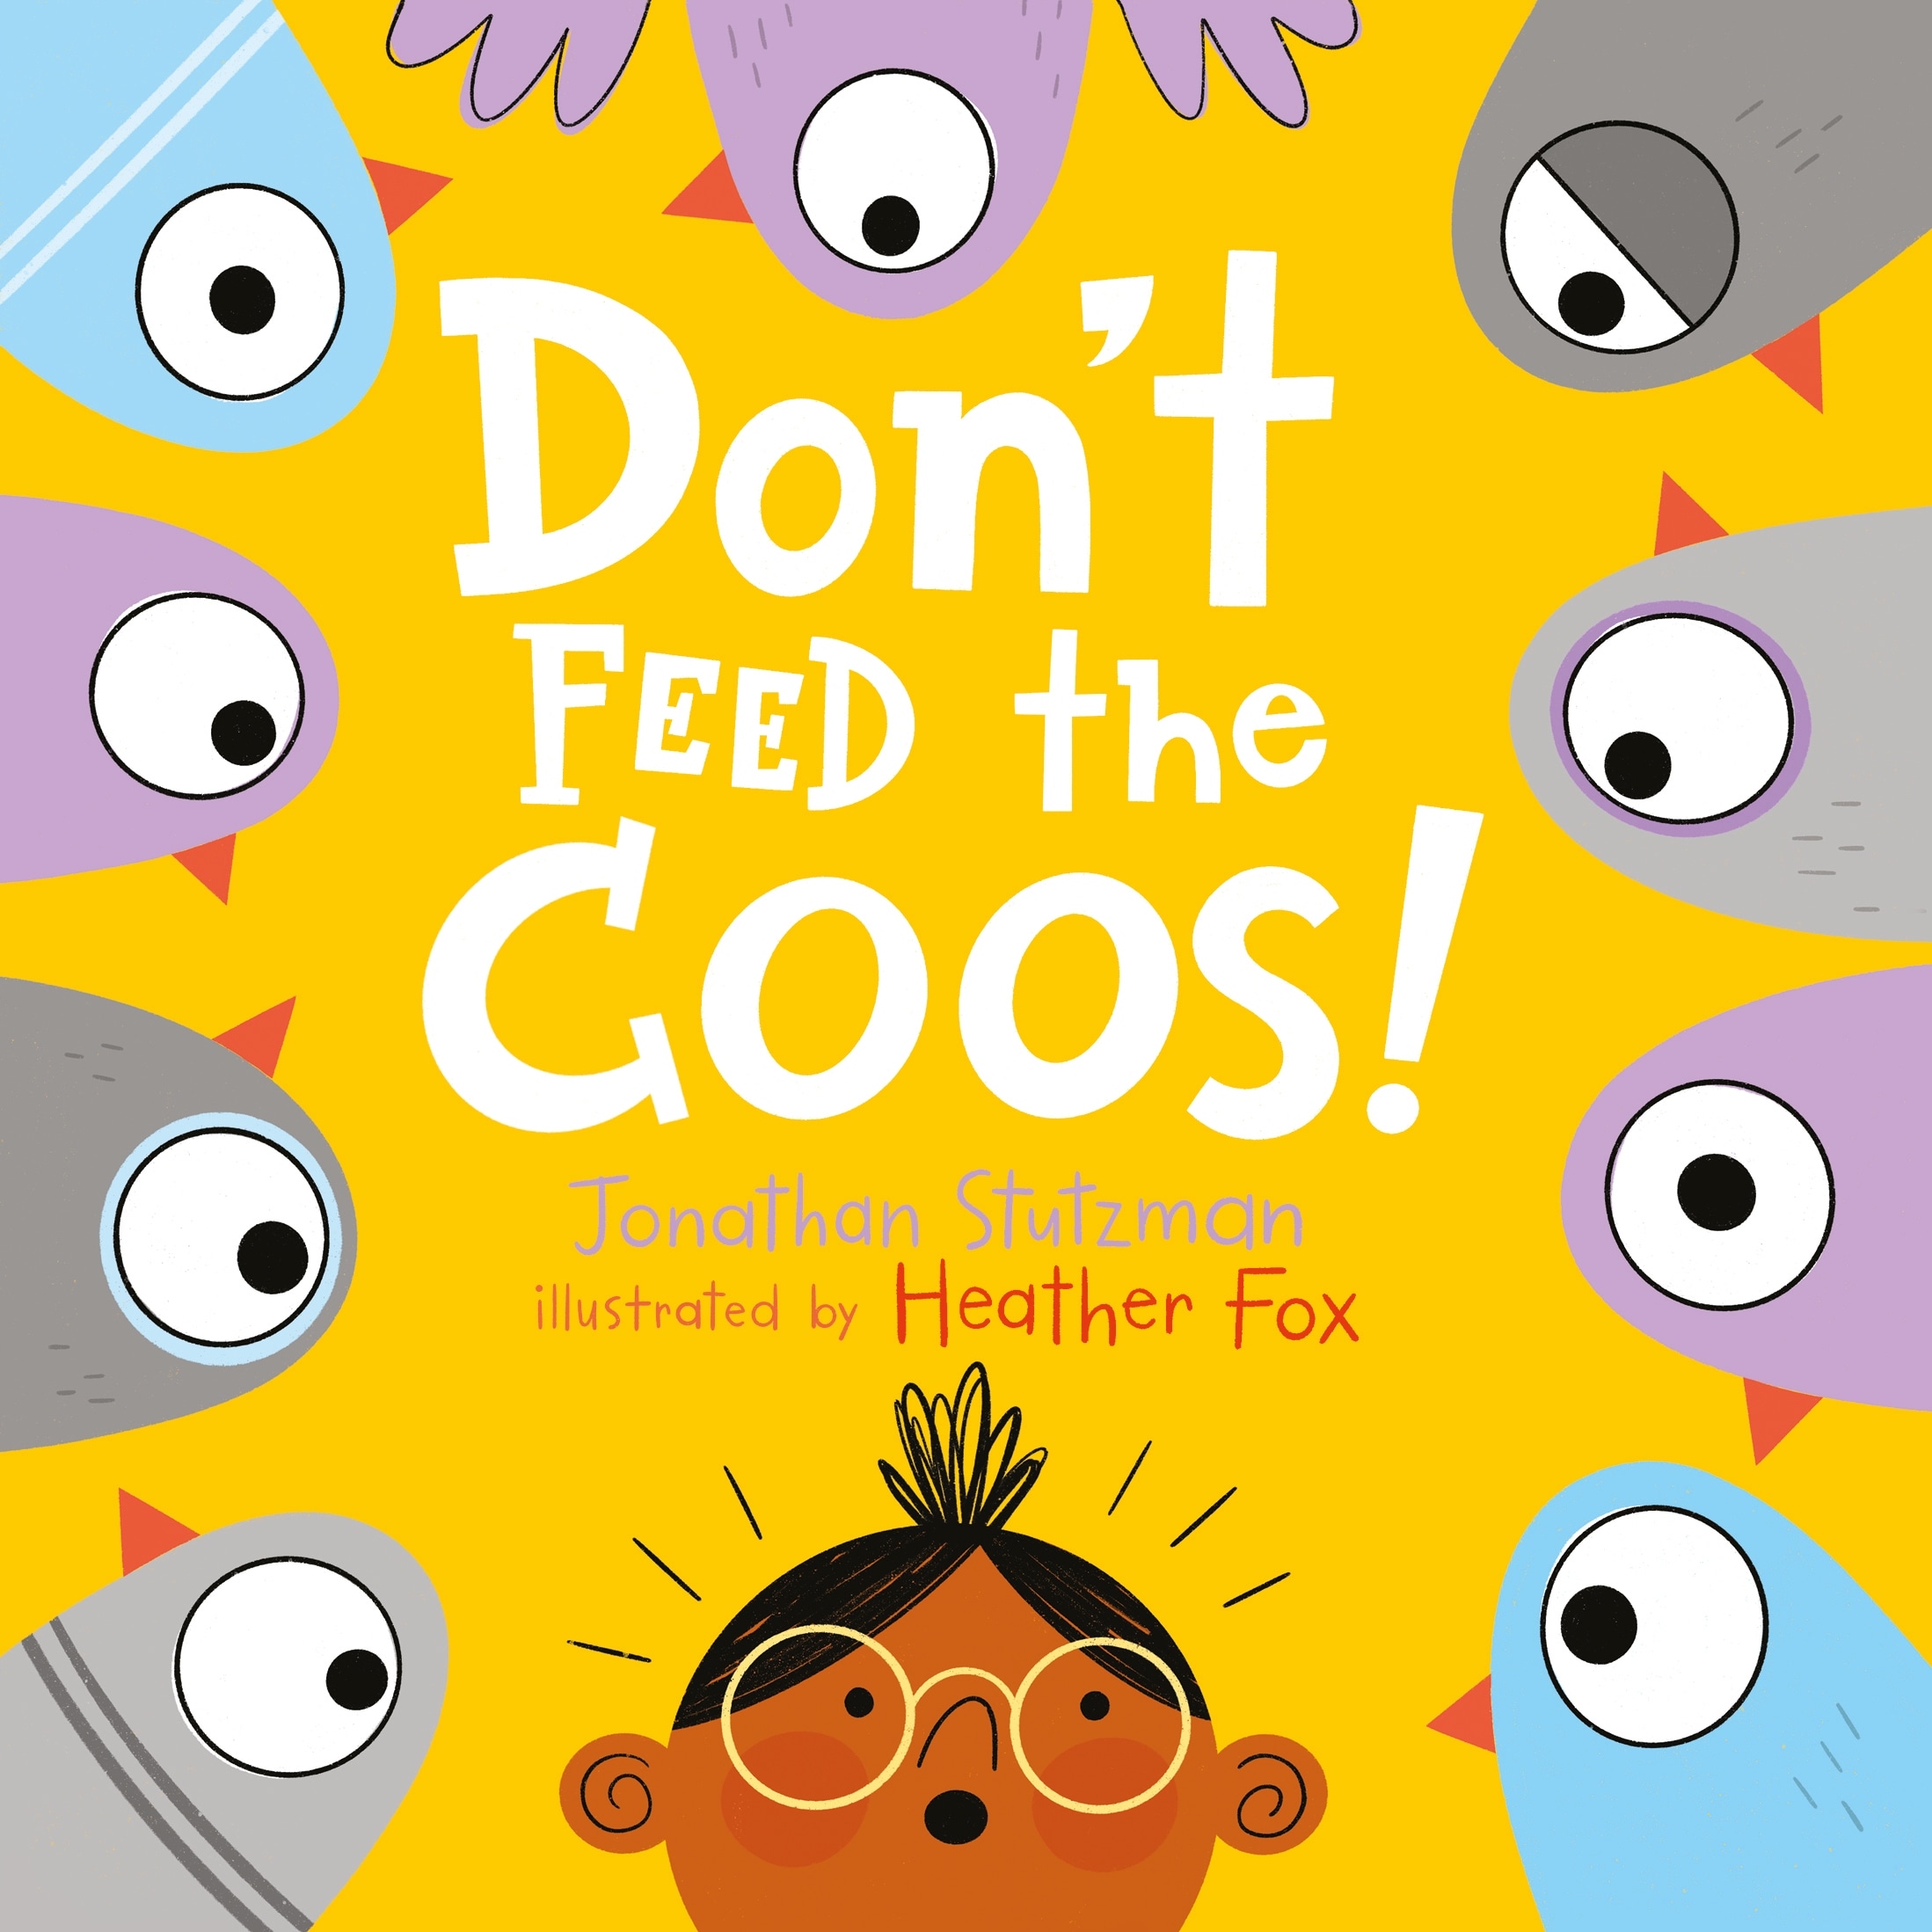 Book “Don't Feed the Coos” by Jonathan Stutzman, Heather Fox — August 20, 2020